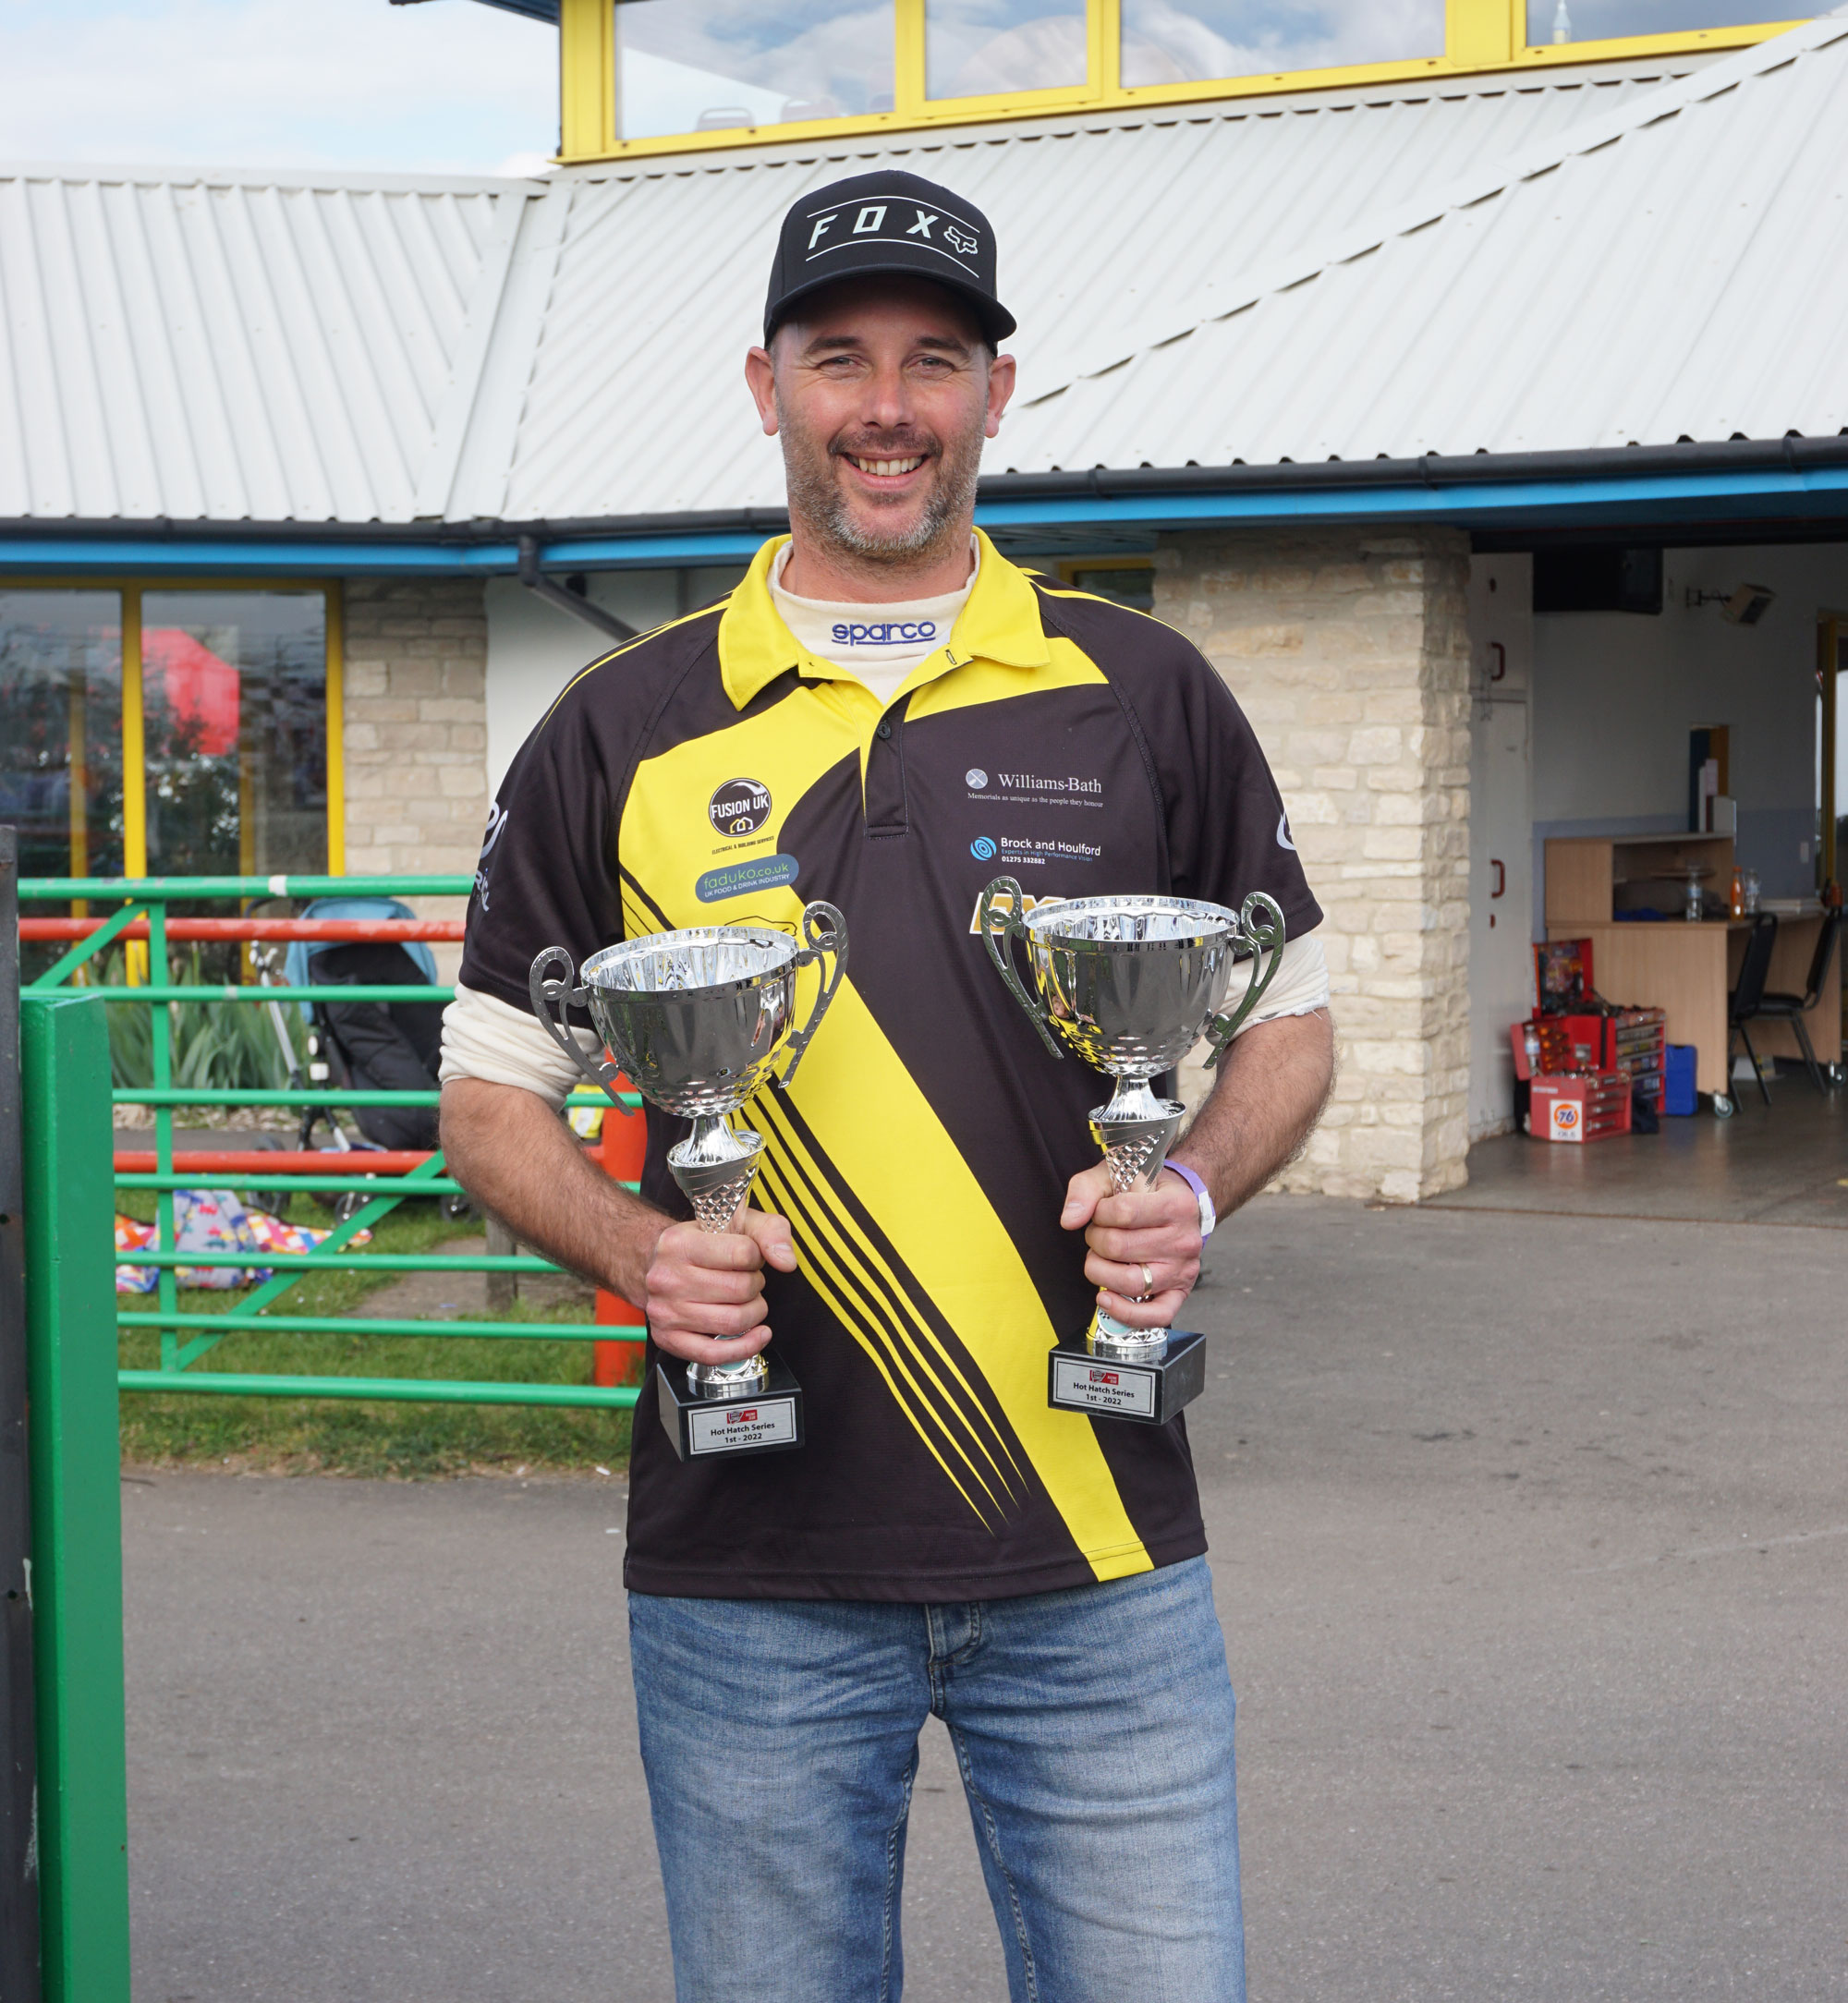 Shaun Deacon from ES racing holding two trophies the team won that day